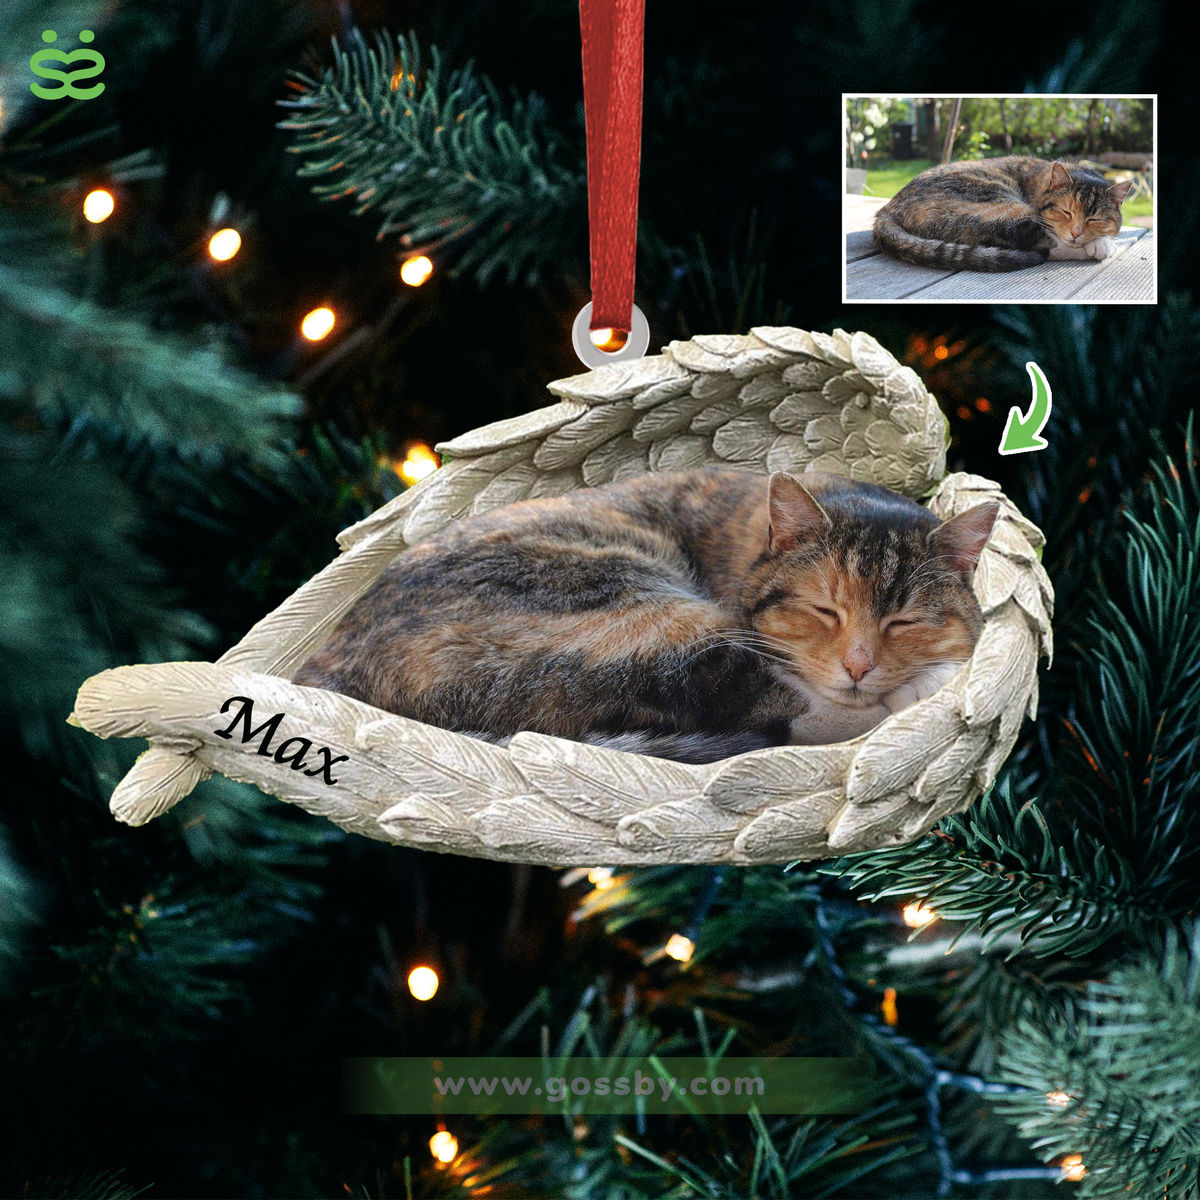 Dog Acrylic Ornament - Dog Lover Gifts - Sleeping Pet Within Angel Wings - Customized Your Photo Ornament, Custom Photo Gifts, Christmas Gifts_3